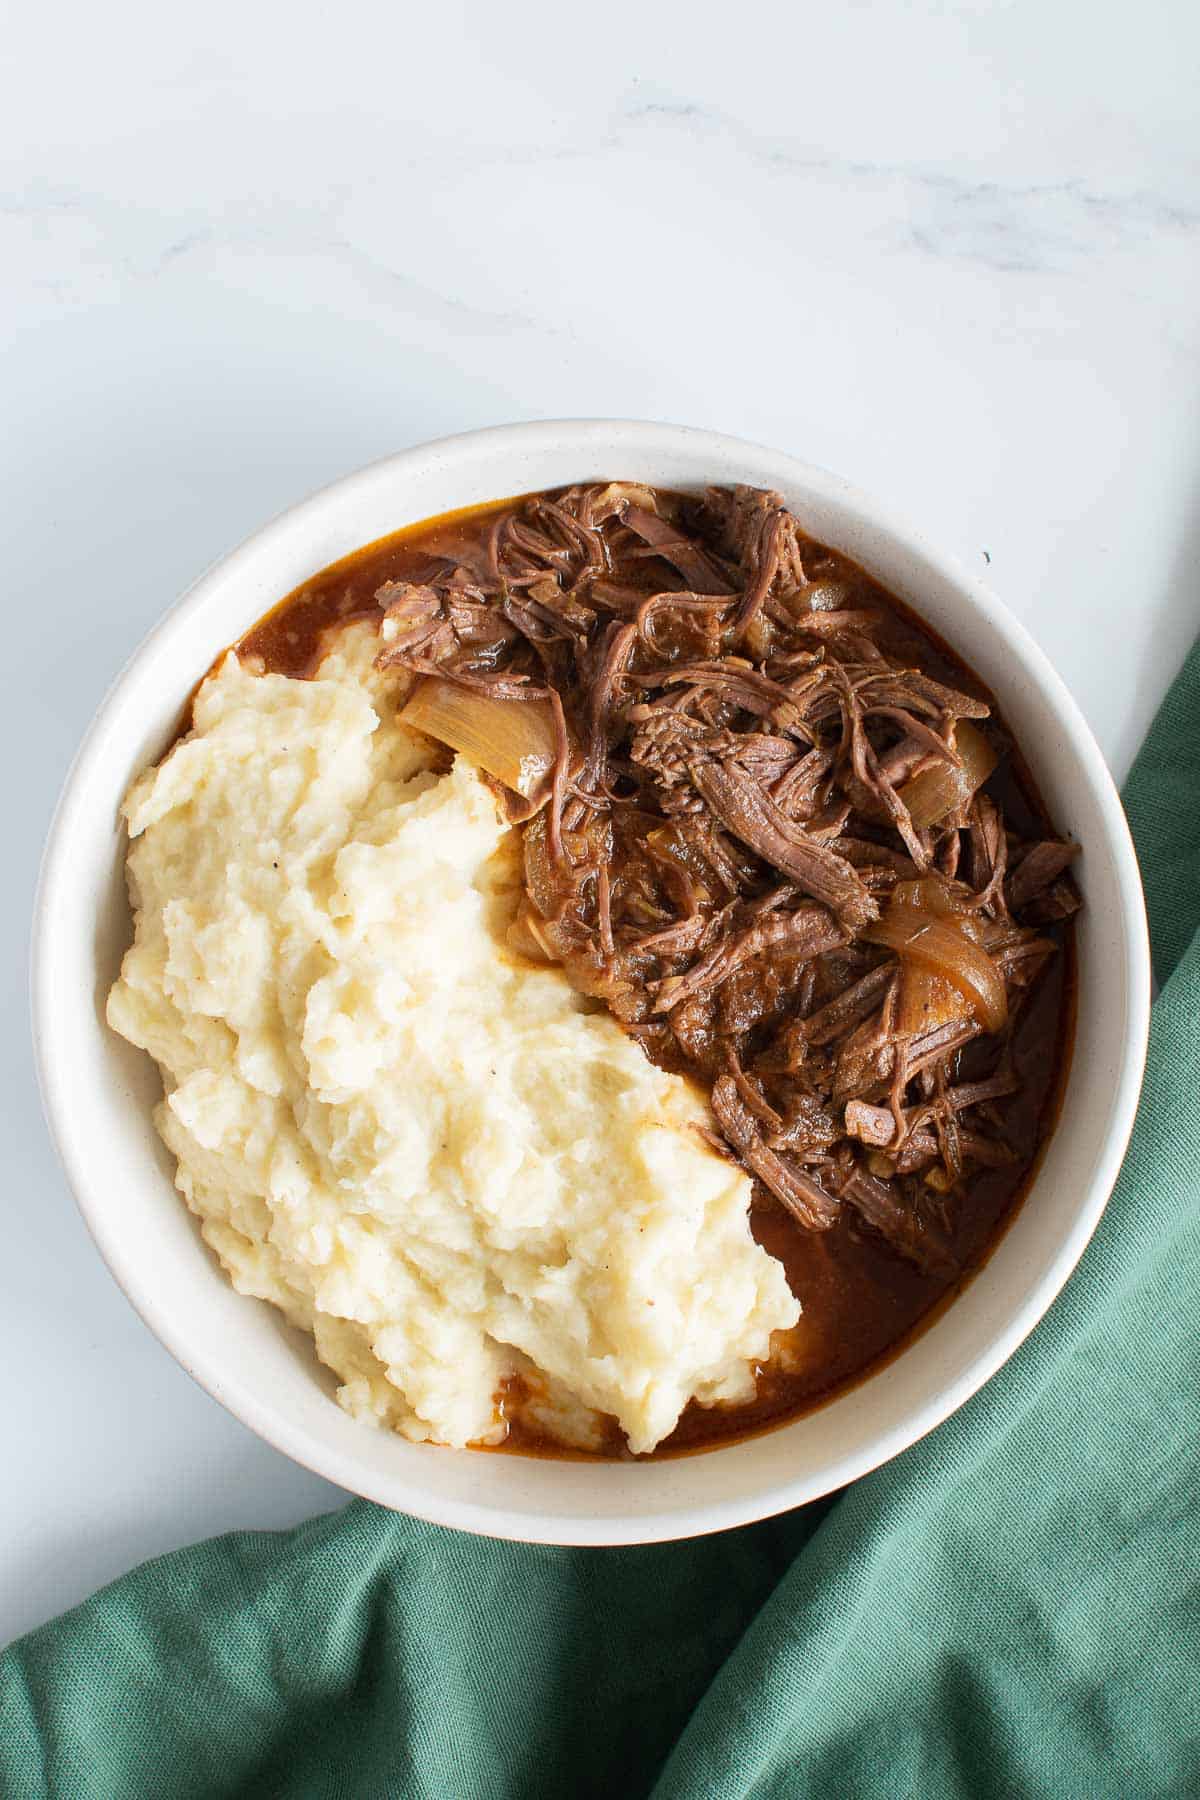 Slow cooker braising steak and onions, with mashed potatoes on the side.